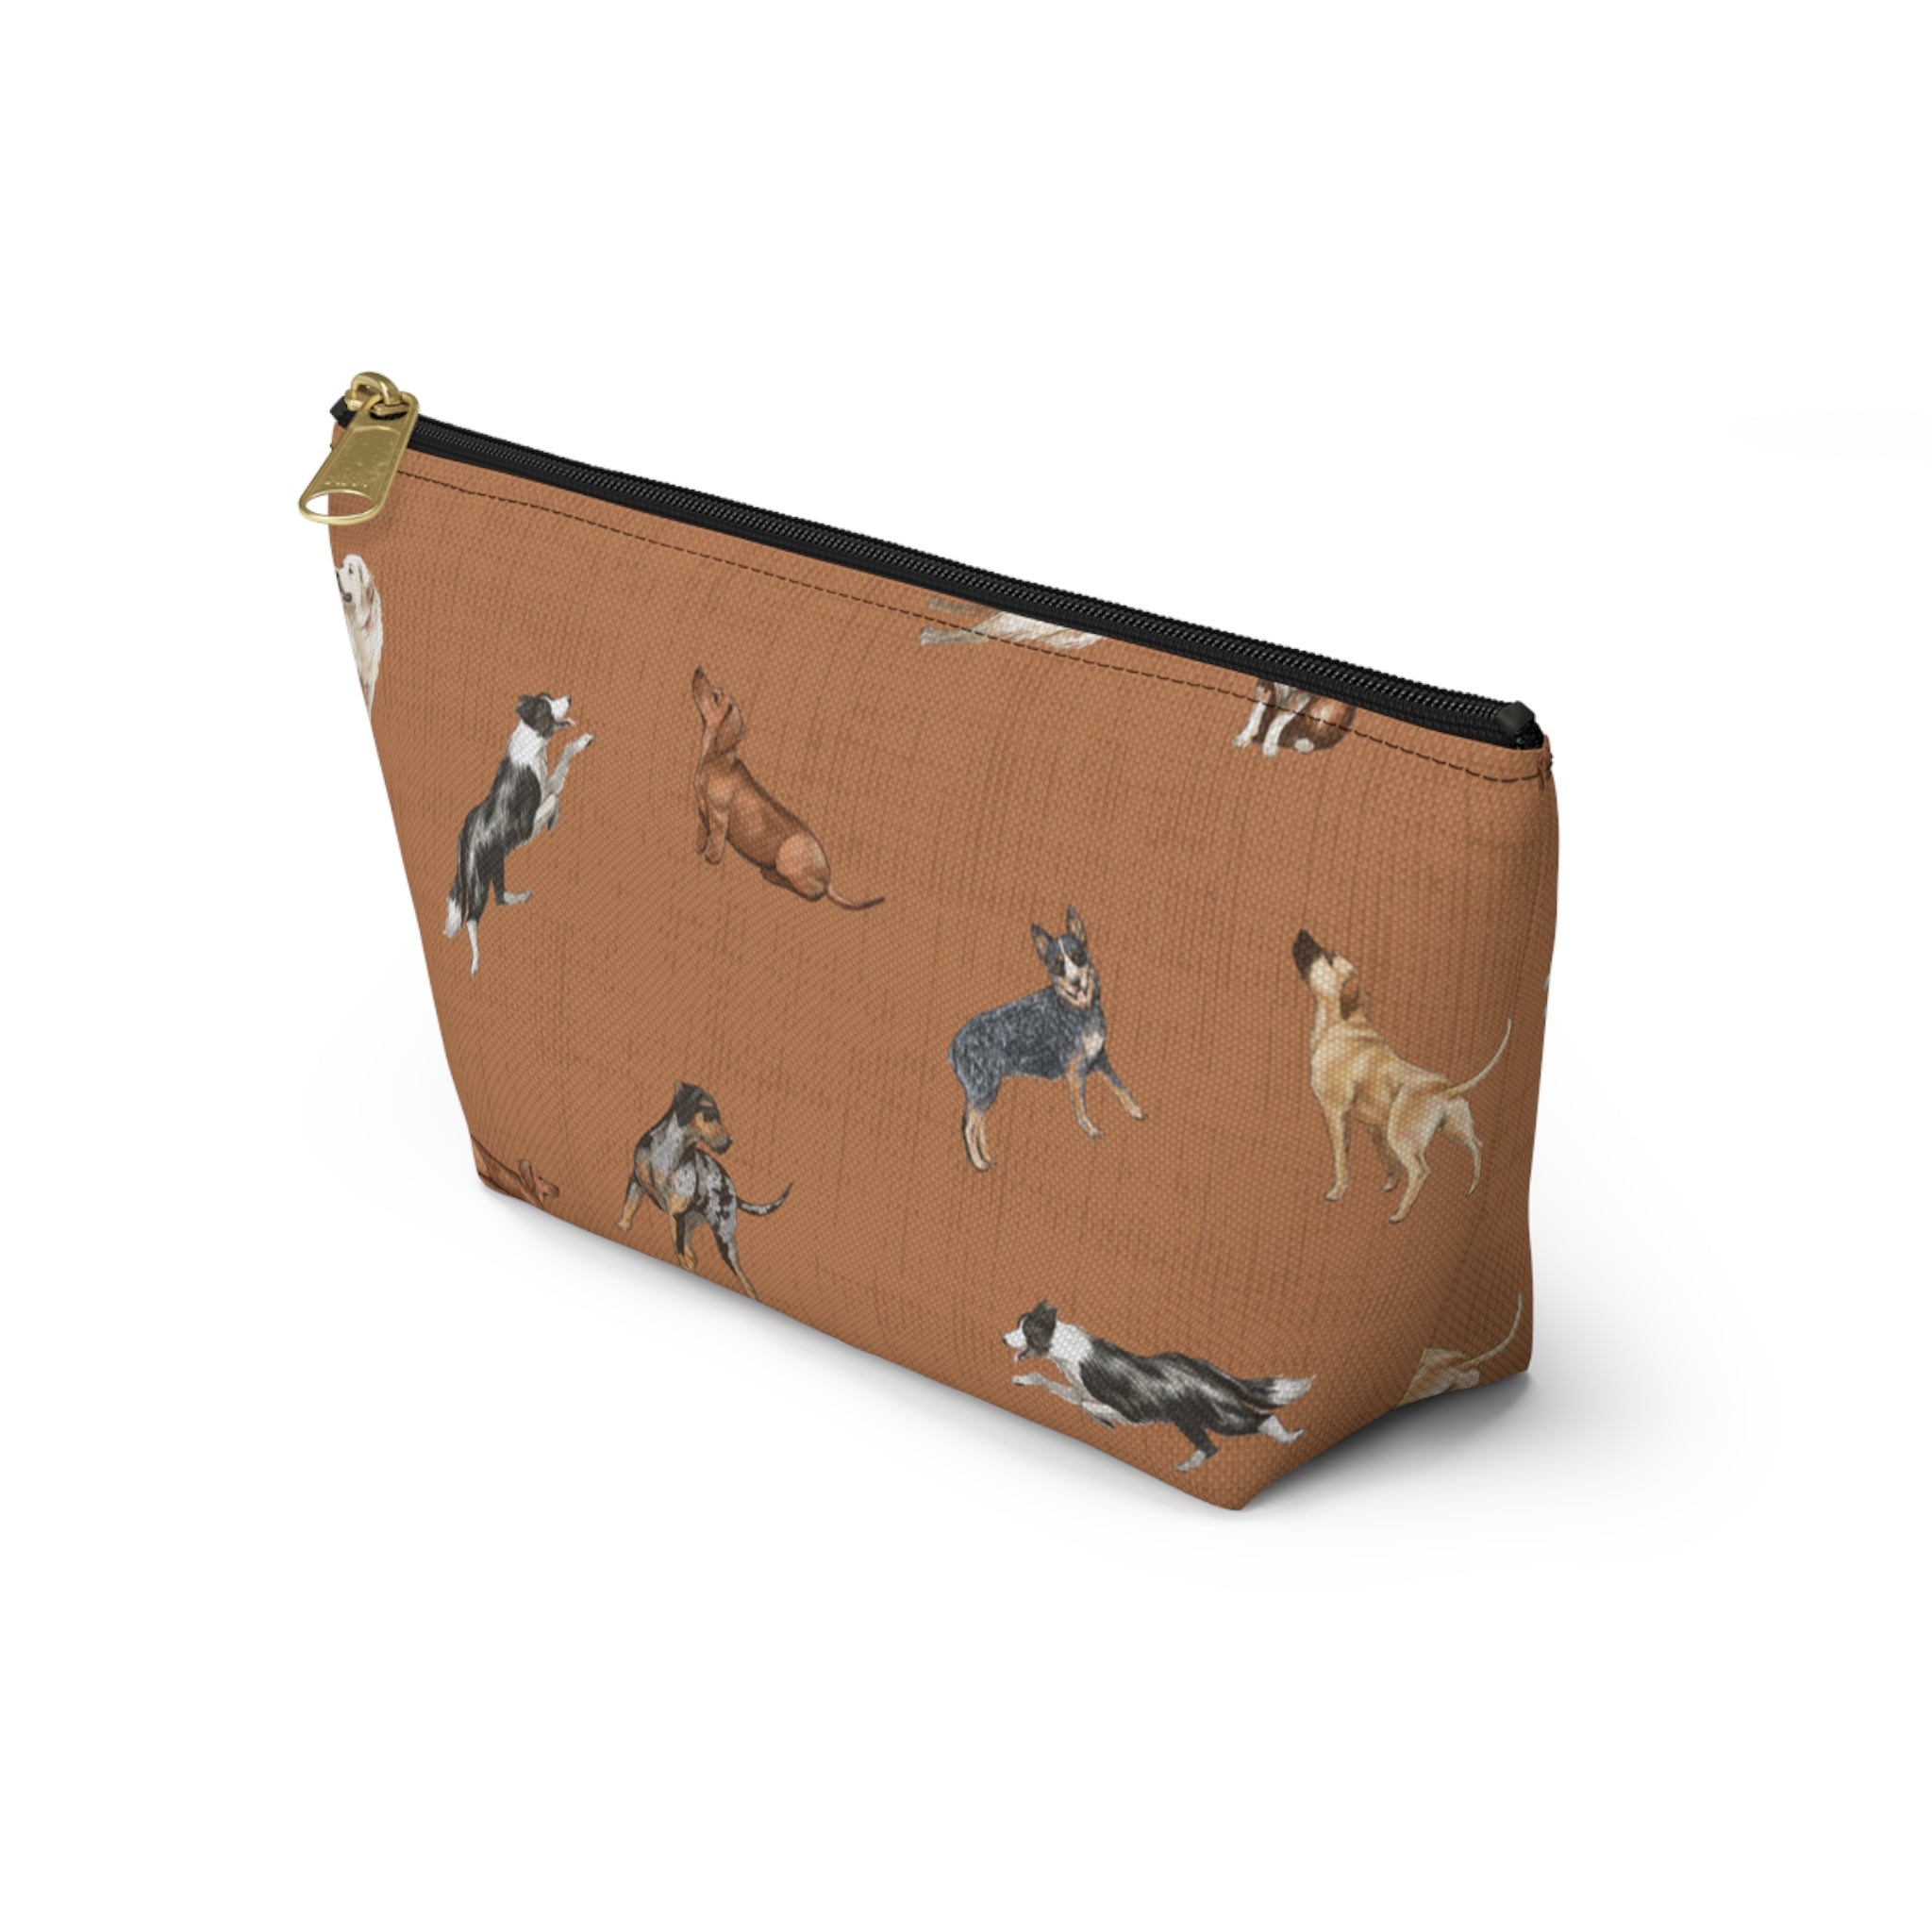 Cow Dogs Pencil Pouch in Saddle